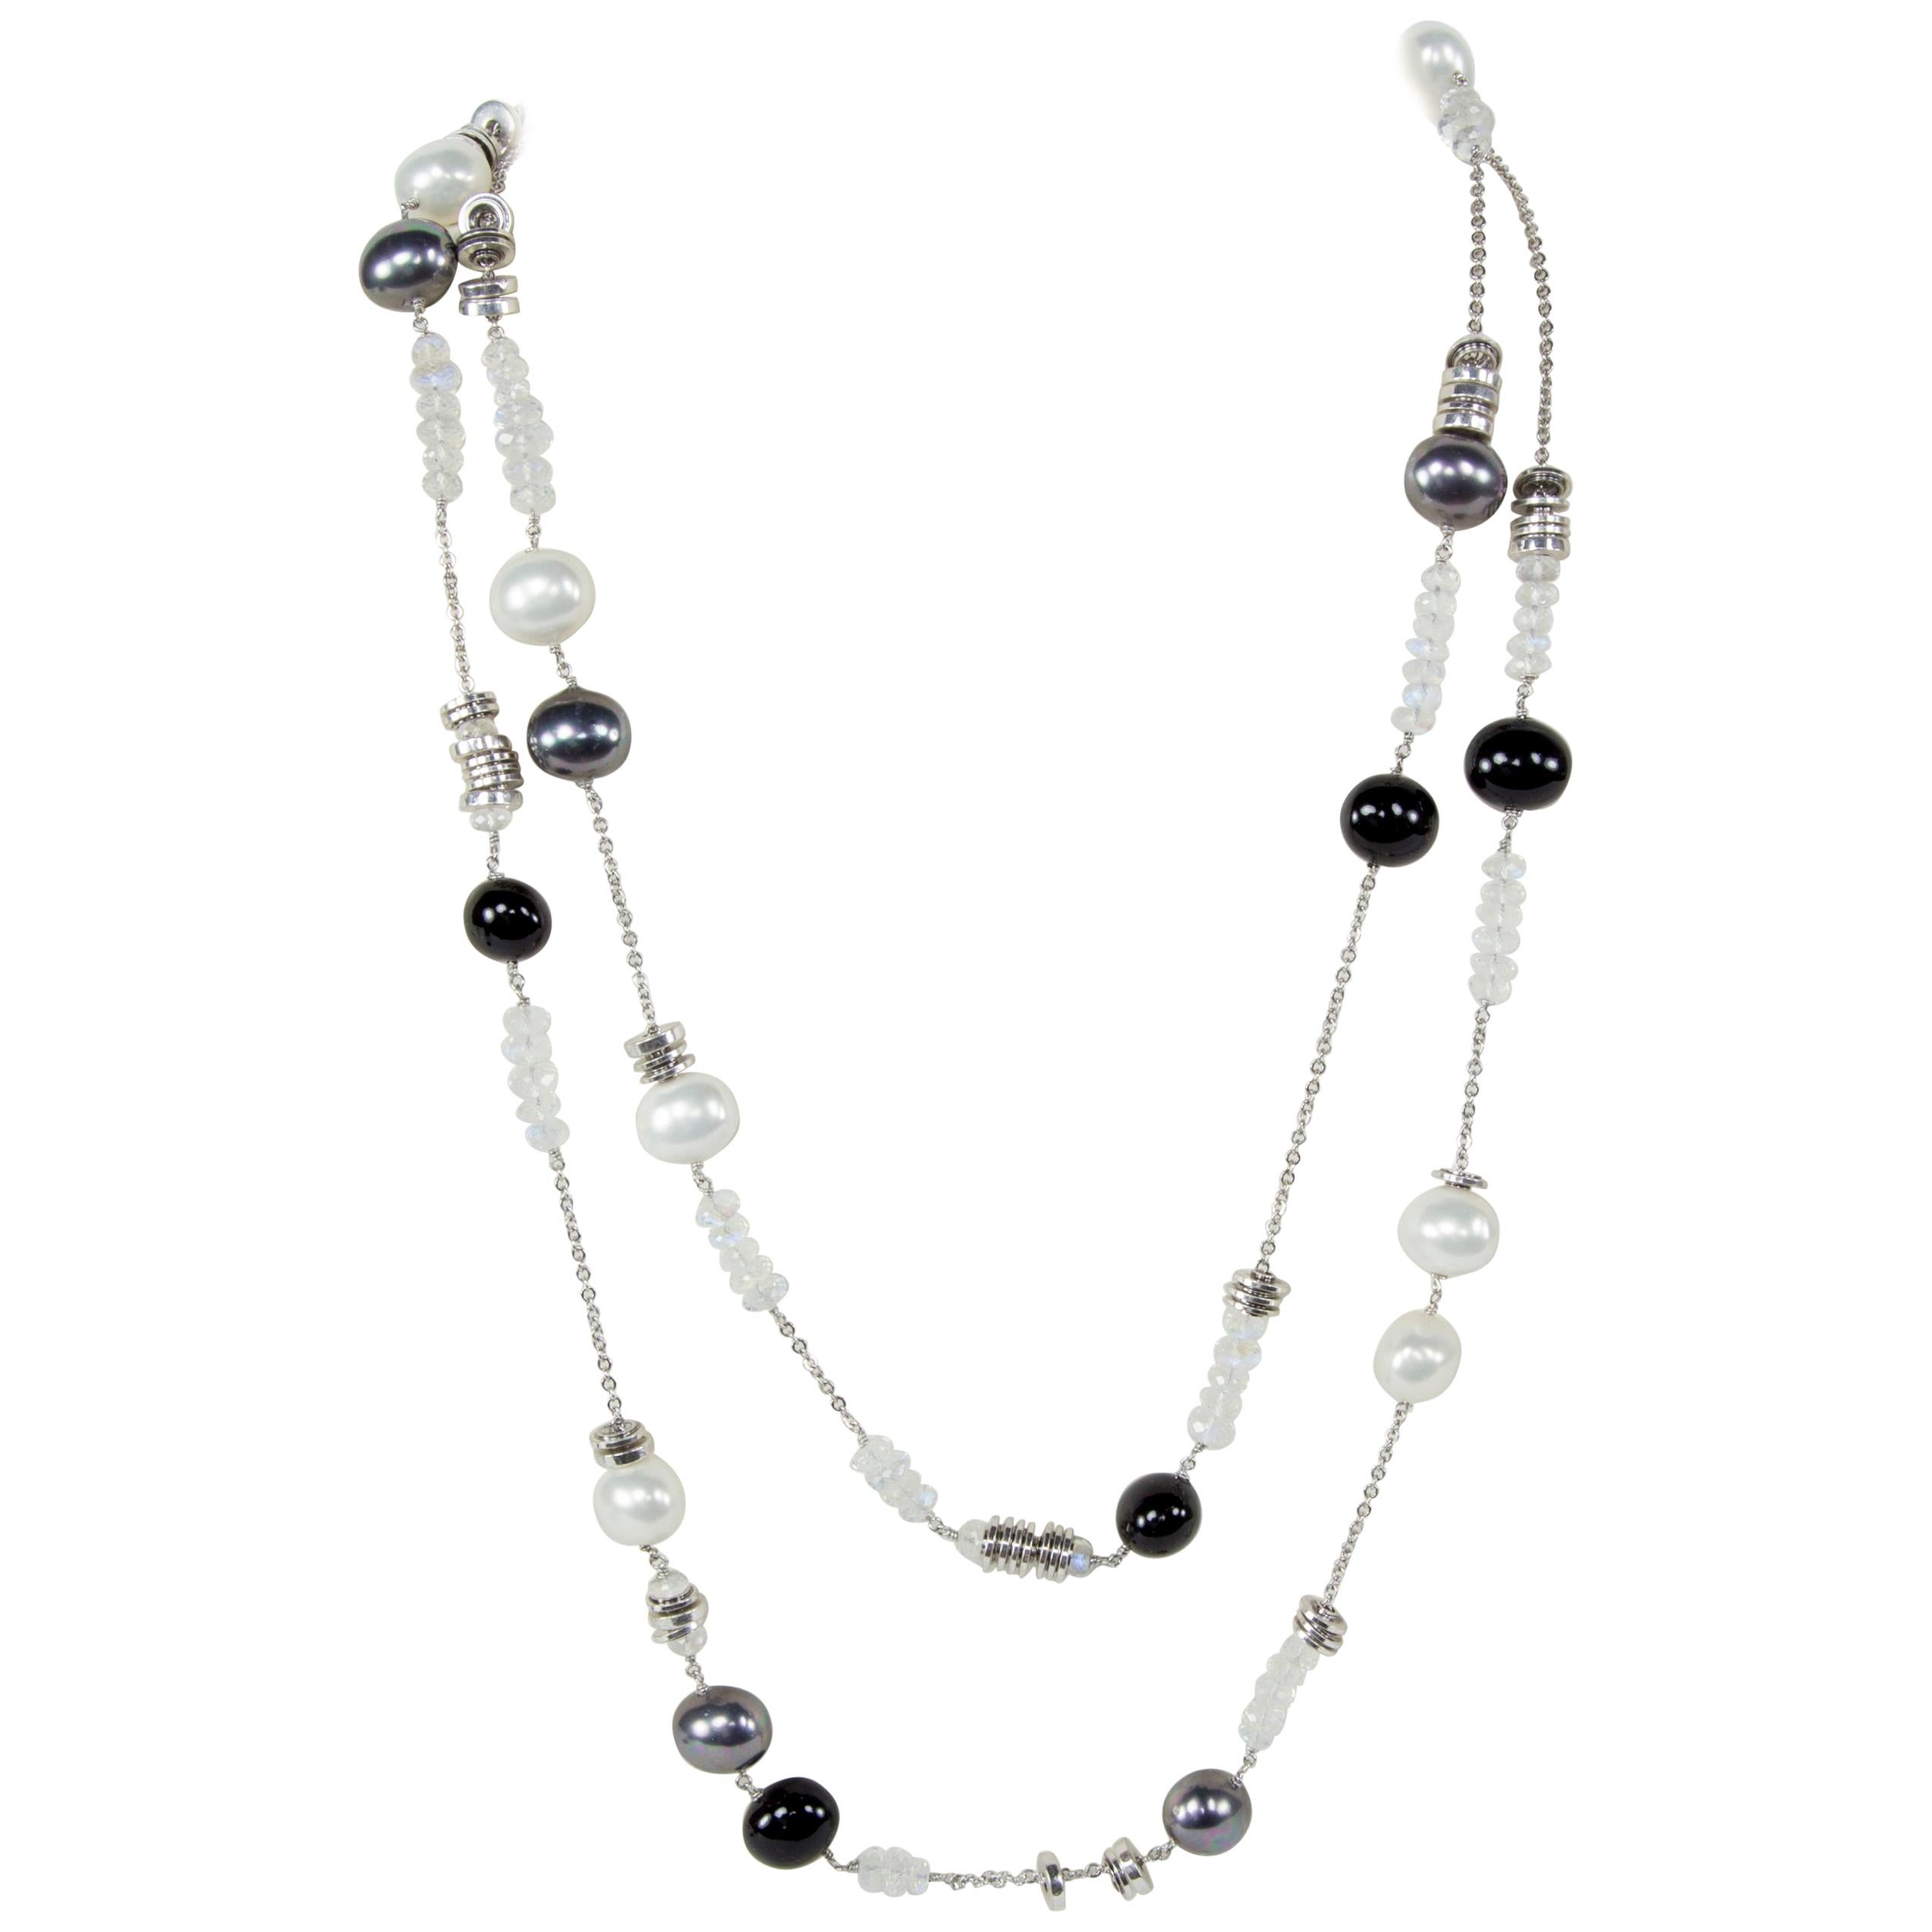 Faux Pearl Opalescent Crystal and Silver Beads Runway Necklace For Sale